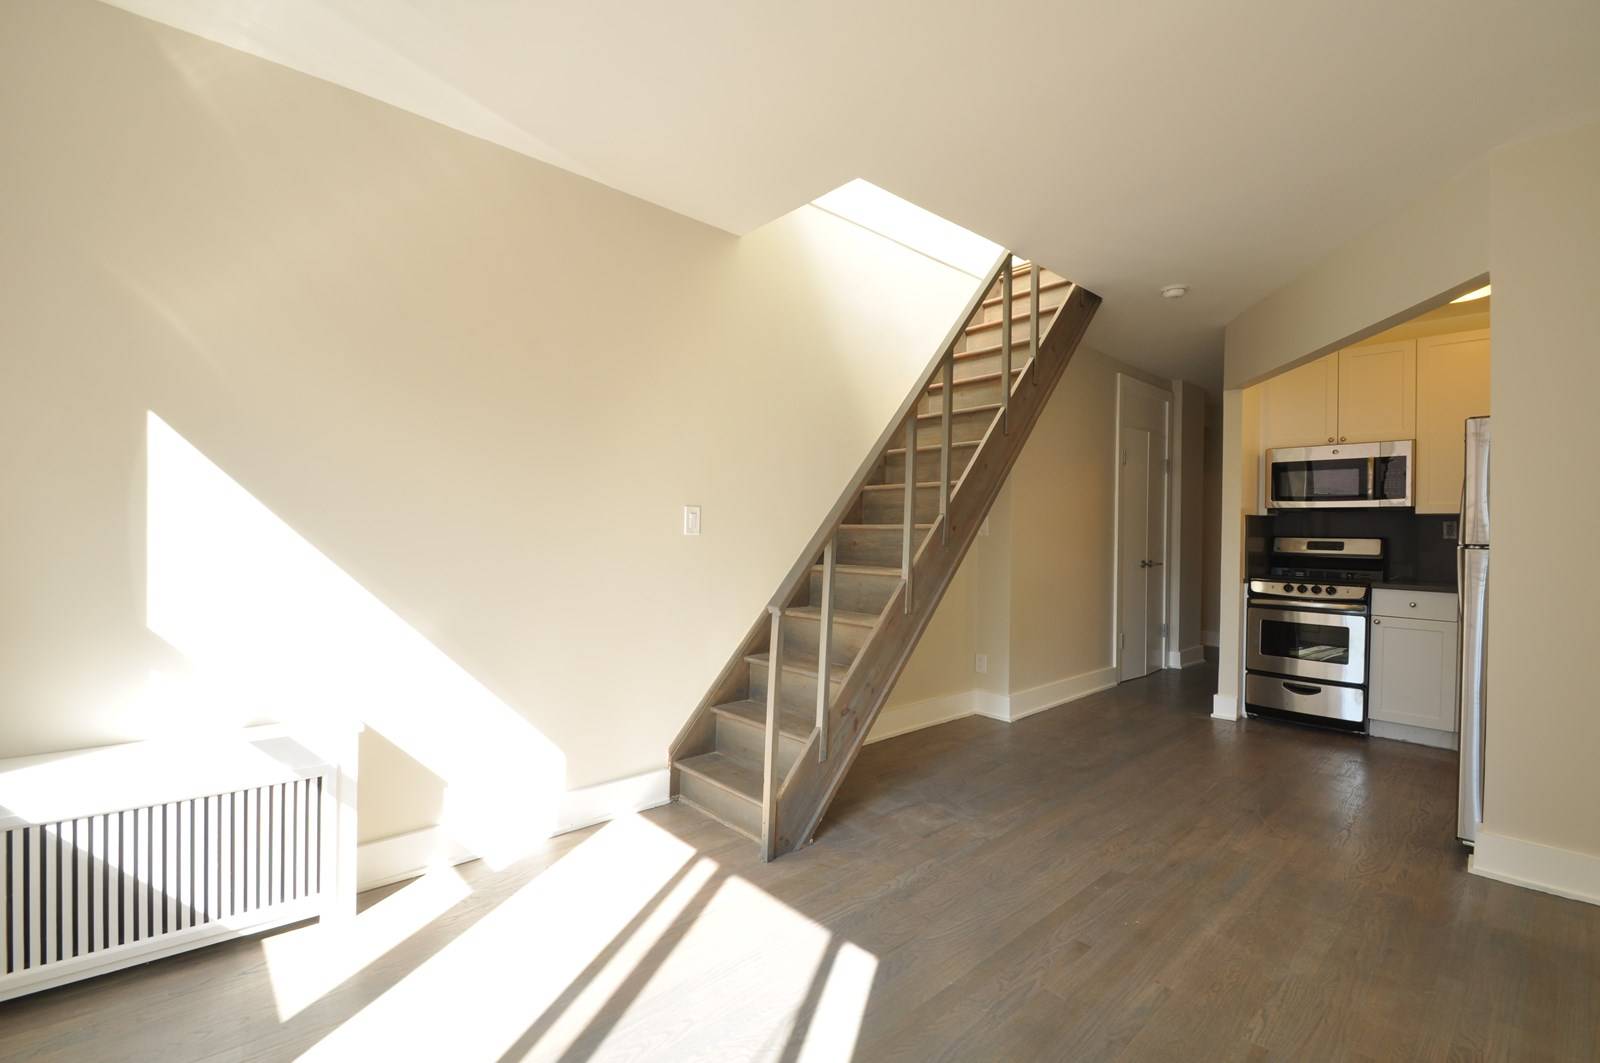 ONE OF A KIND PH DUPLEX WITH TERRACE! SUNNY FIND IN MURRAY HILL!